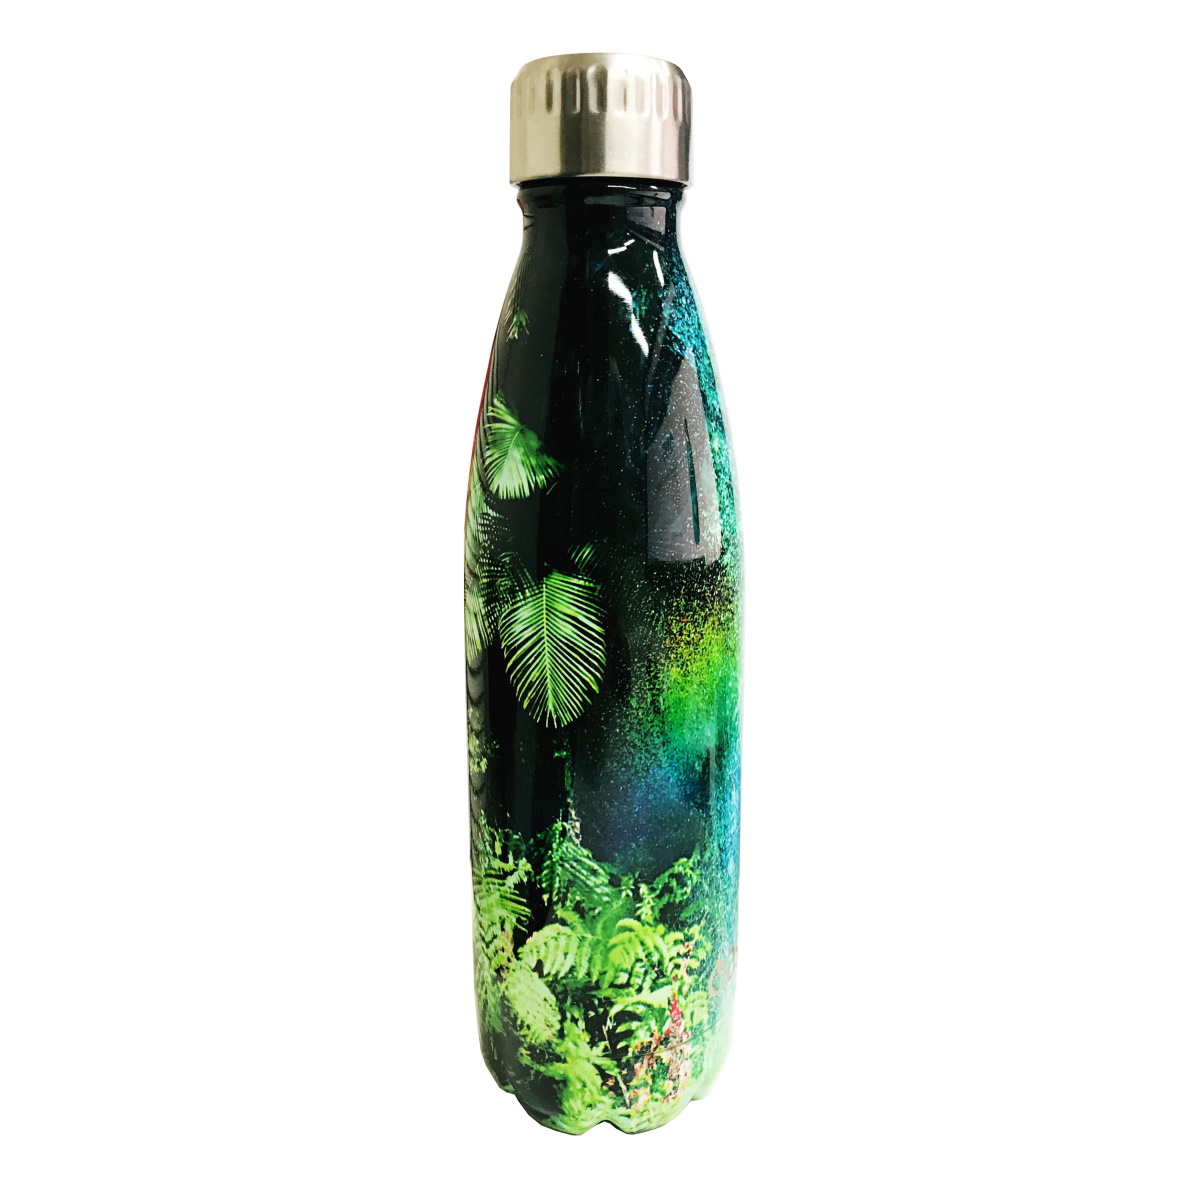 Oasis Stainless Steel Double Wall Insulated Drink Bottle 500ml - Rainforest